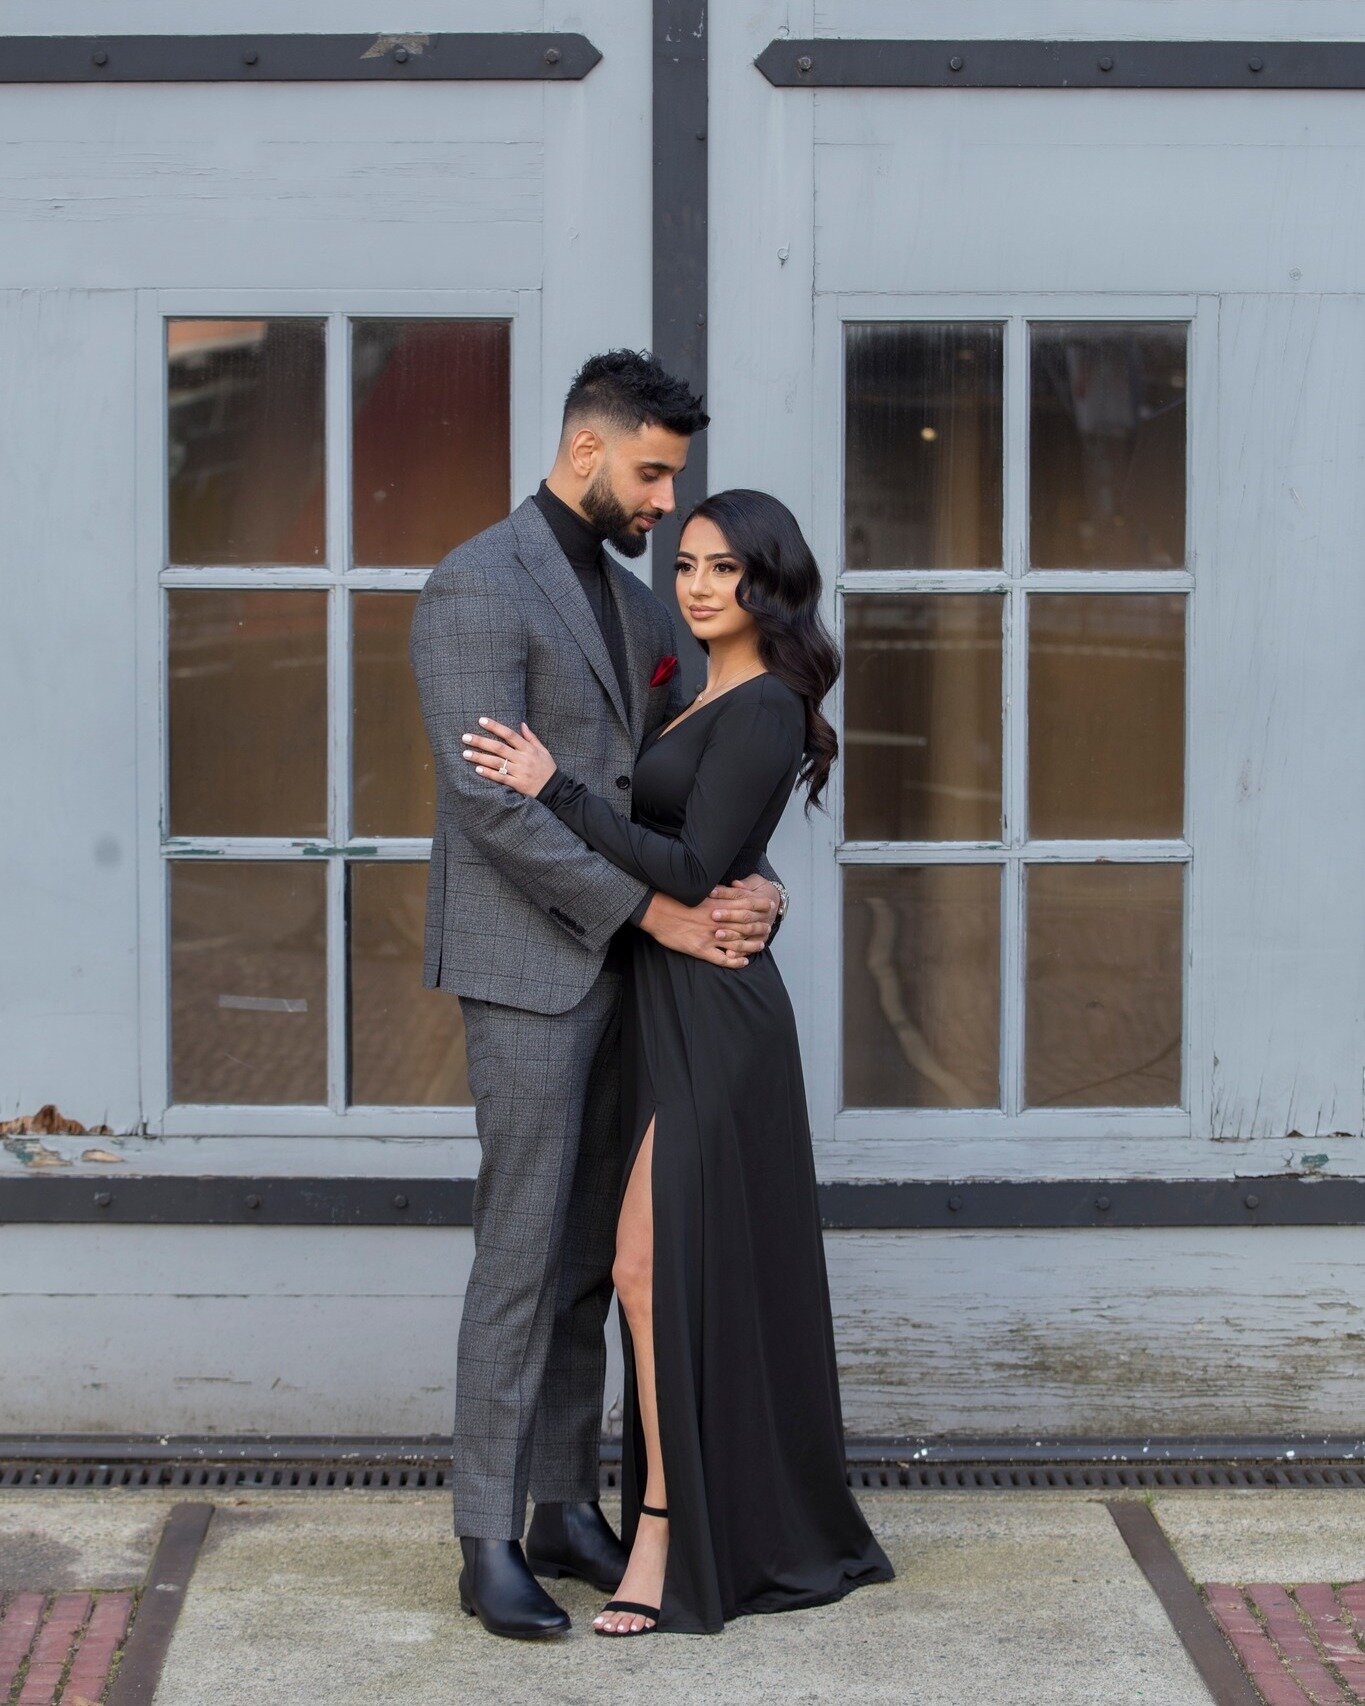 Jasmin &amp; Gurinder&rsquo;s City Casuals
@jaasmin_k +  @dosanjh_g 

&mdash;&mdash;&mdash;&mdash;&mdash;&mdash;&mdash;&mdash;&mdash;&mdash;&mdash;&mdash;&mdash;&mdash;&mdash;

#photography + #cinematography = @glimmerfilms

#indianwedding #indianwed